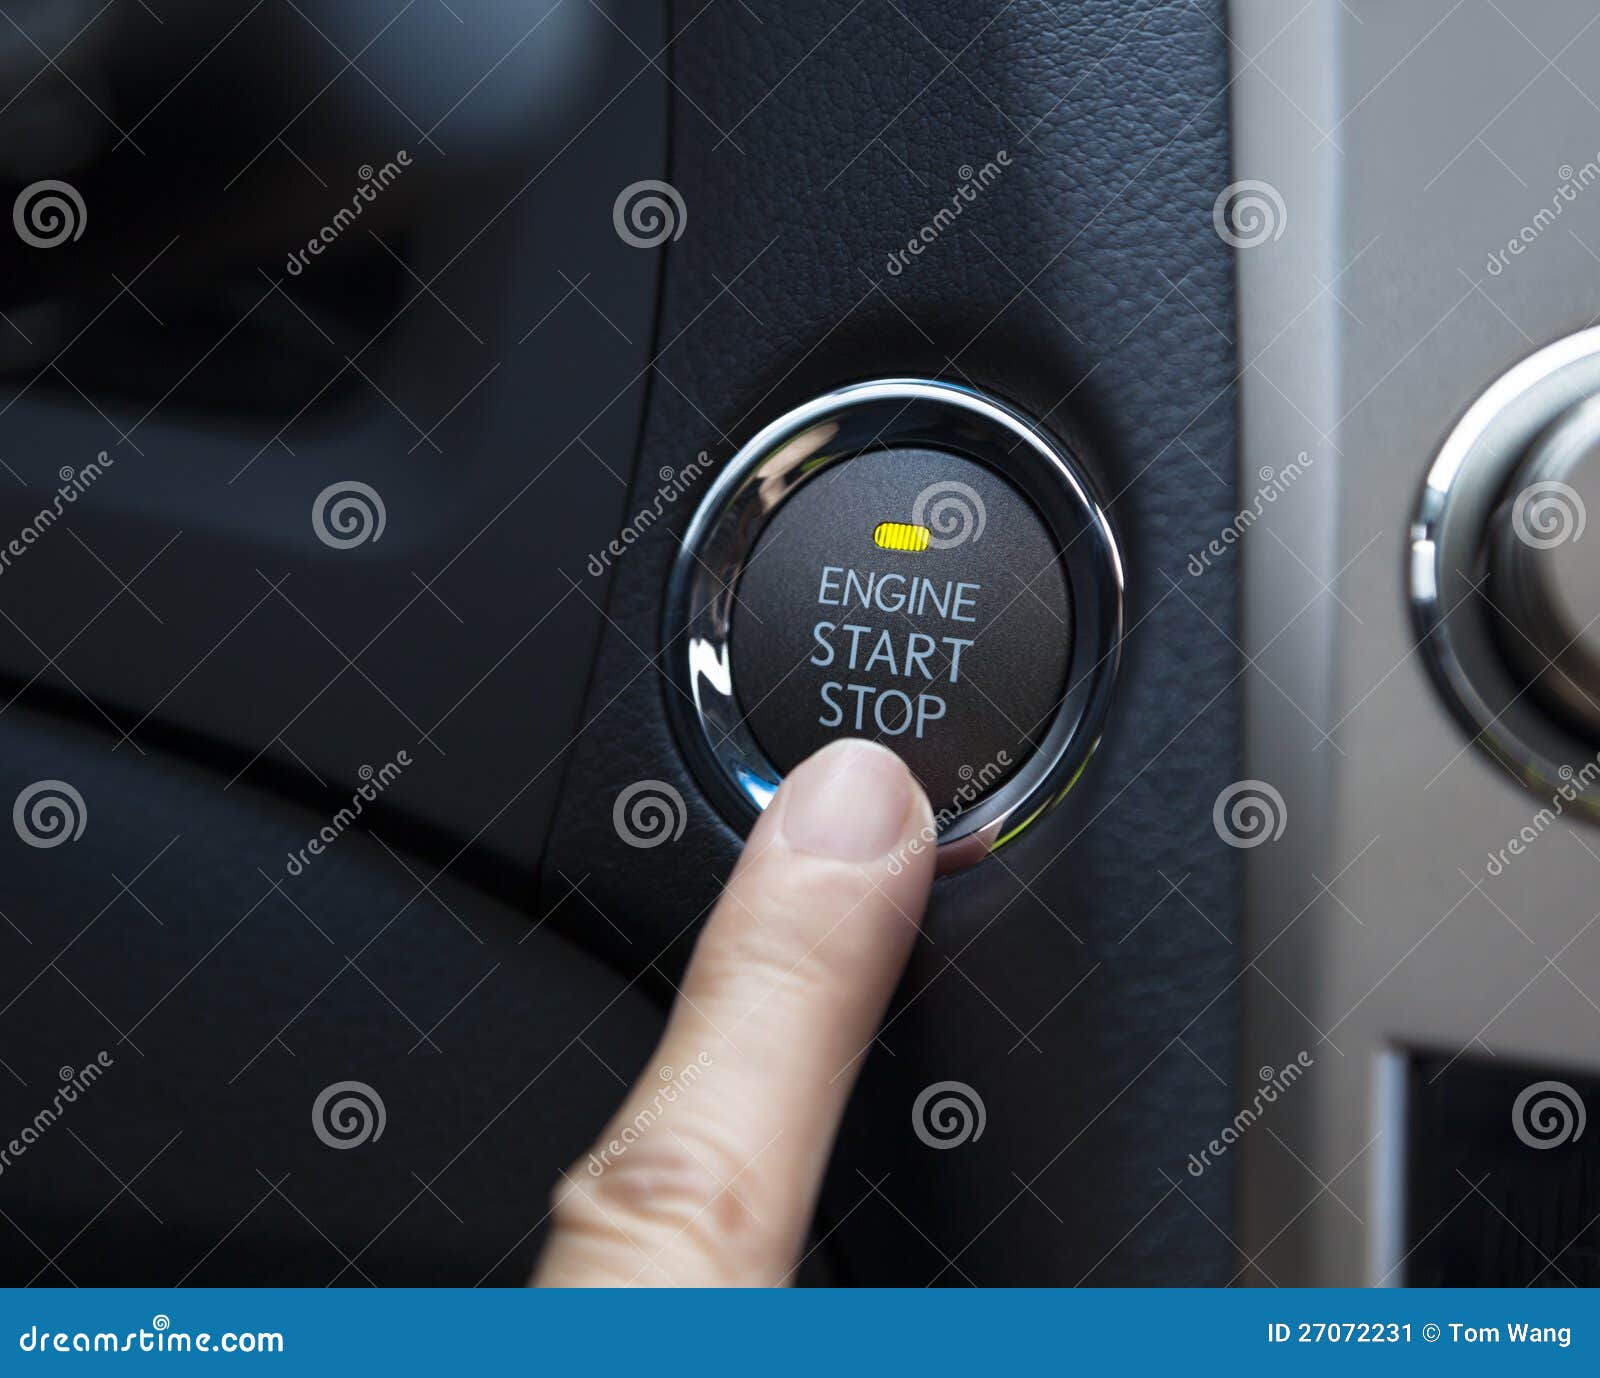 engine start stop button of a car